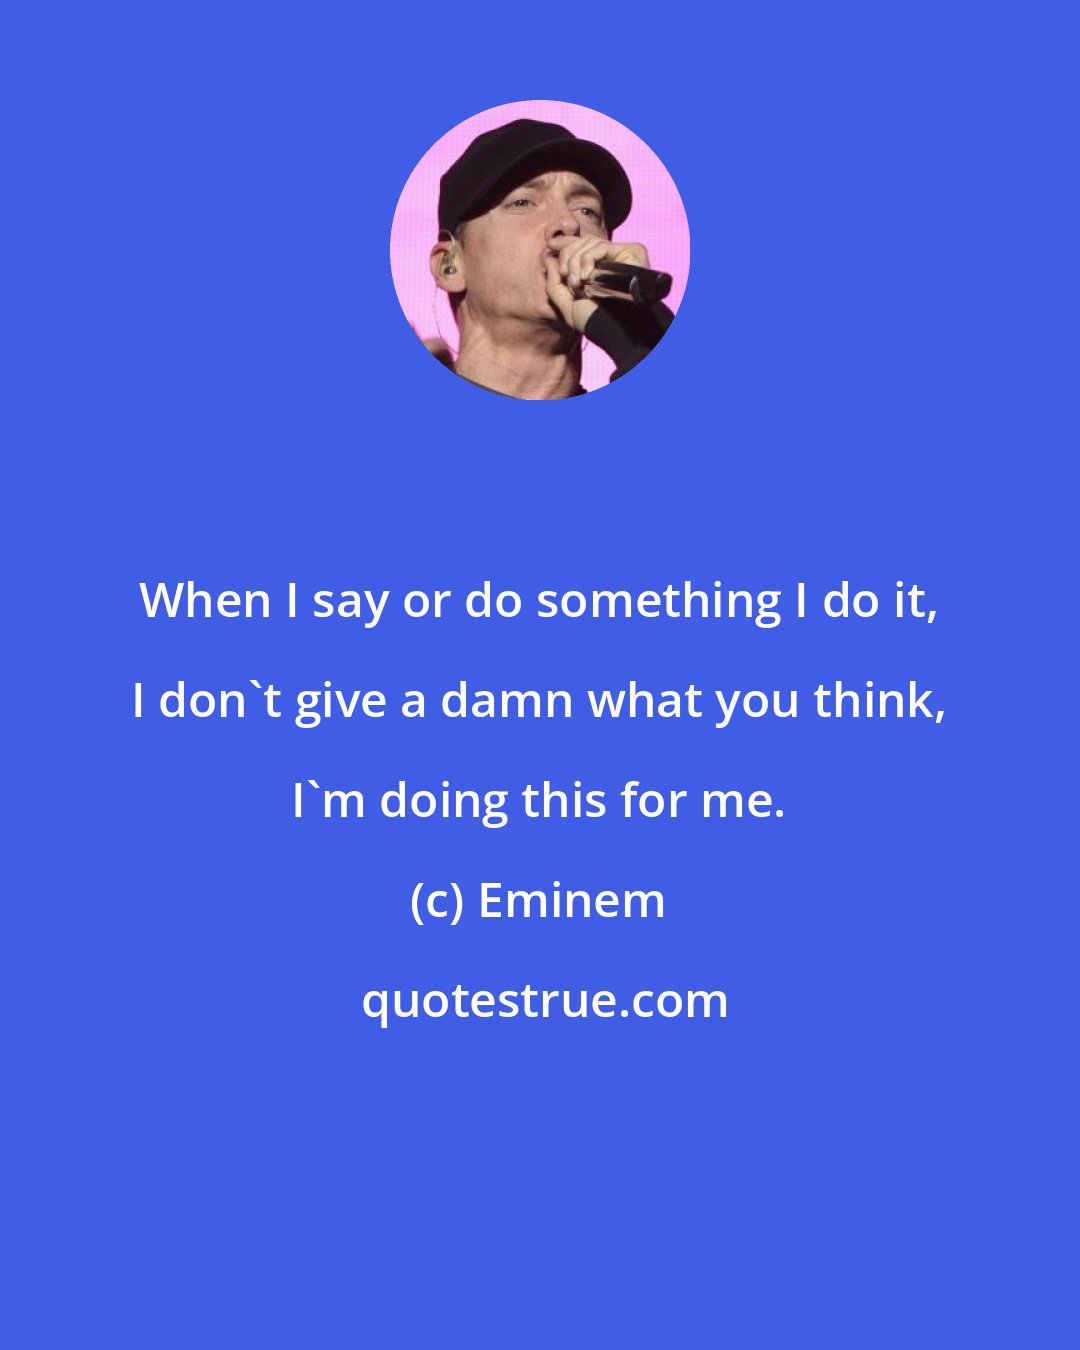 Eminem: When I say or do something I do it, I don't give a damn what you think, I'm doing this for me.